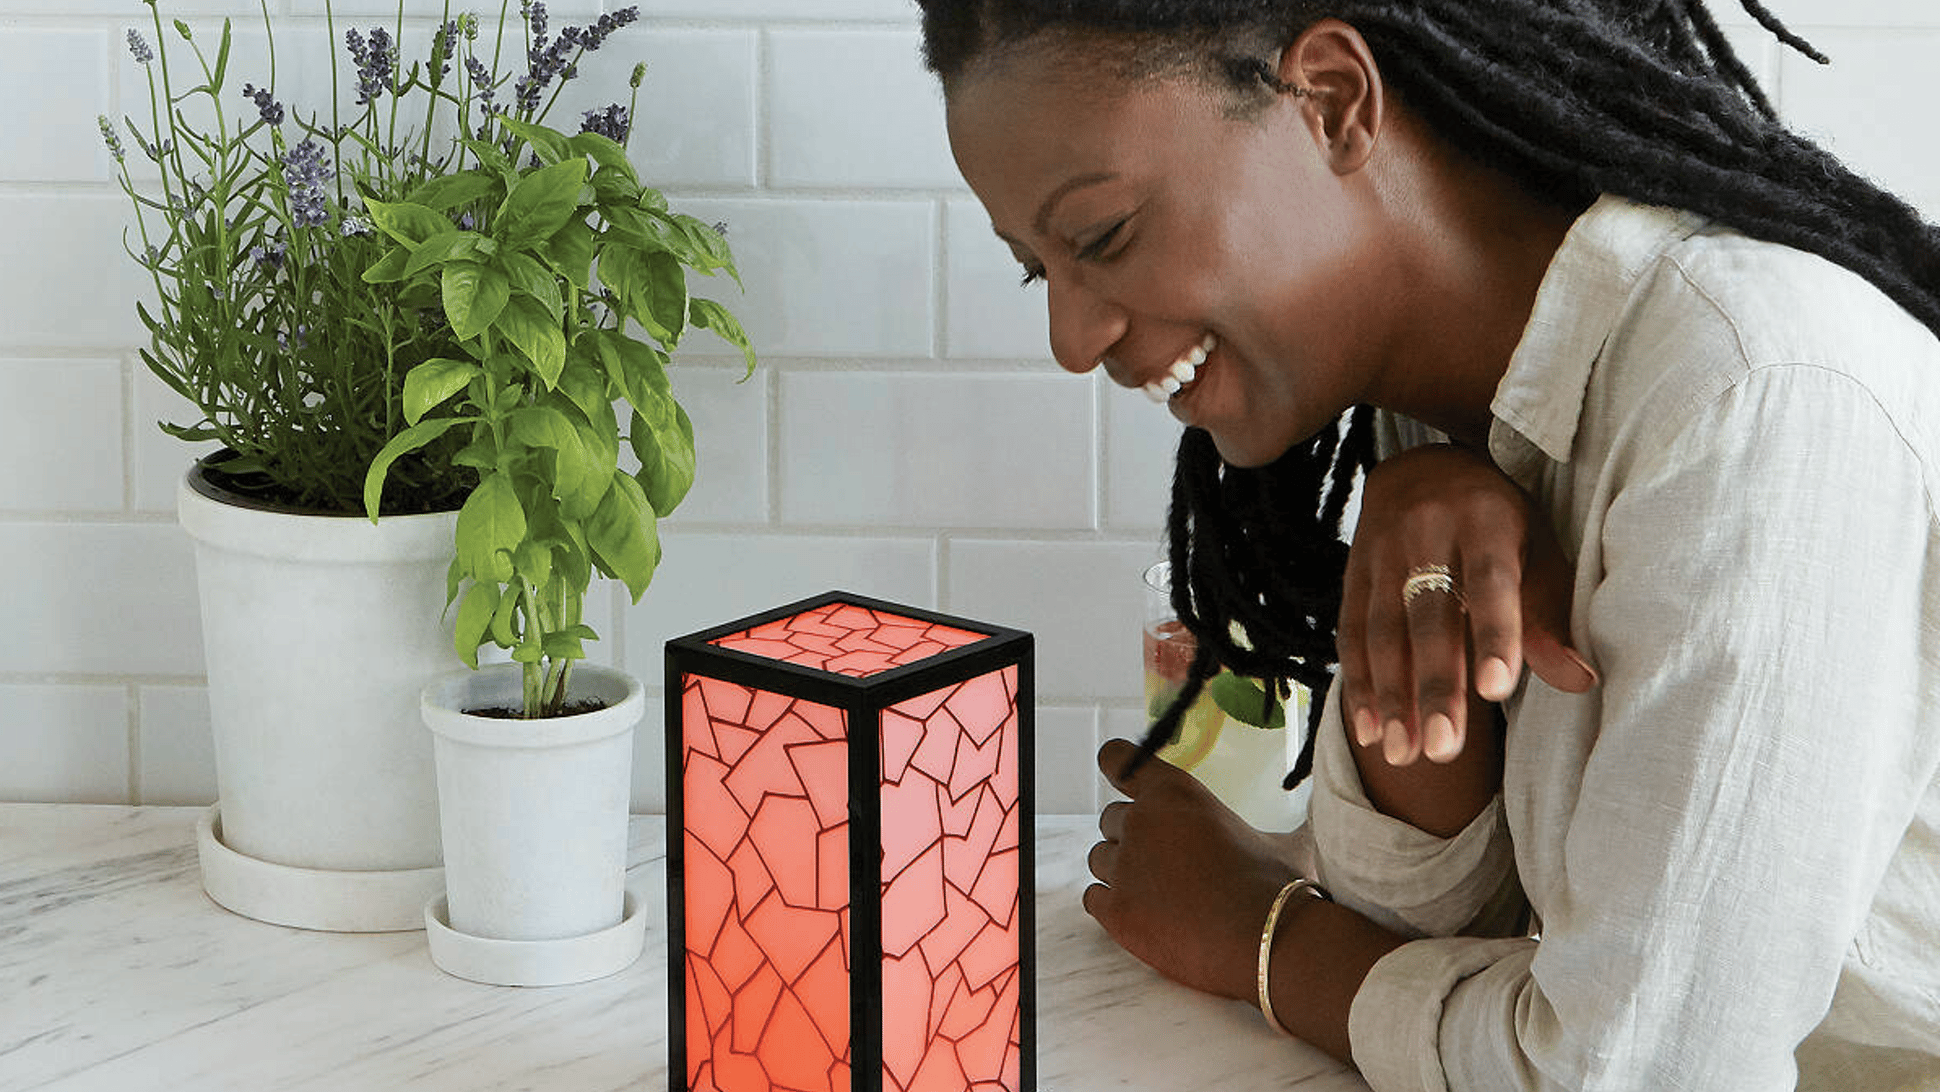 This Long-Distance Friendship Lamp Will Light Up For Your BFF Any Time You Touch It